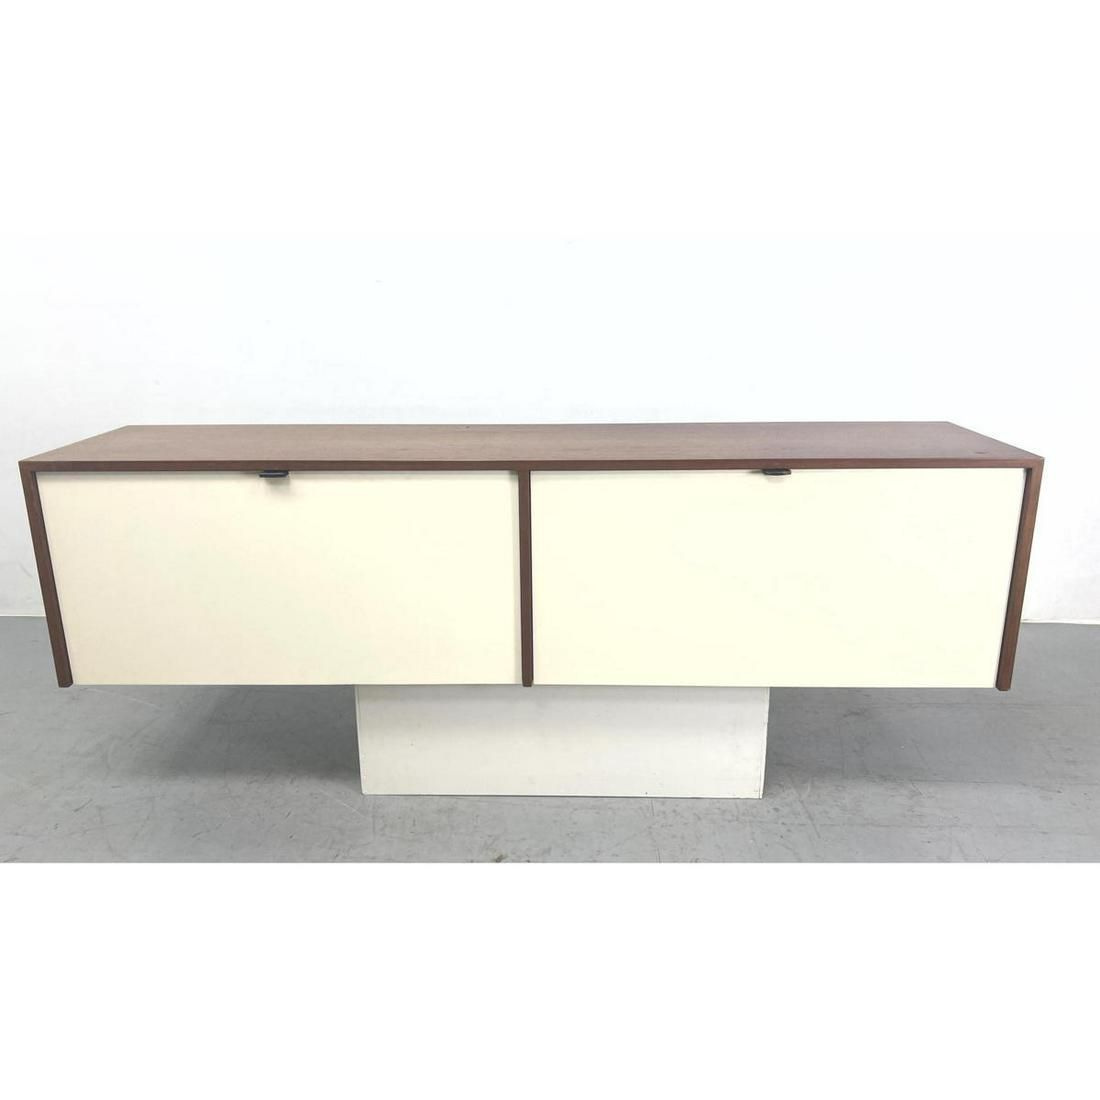 KNOLL American Modern Walnut Wall Hanging Cabinet. Two drop down white doors with leather handles.